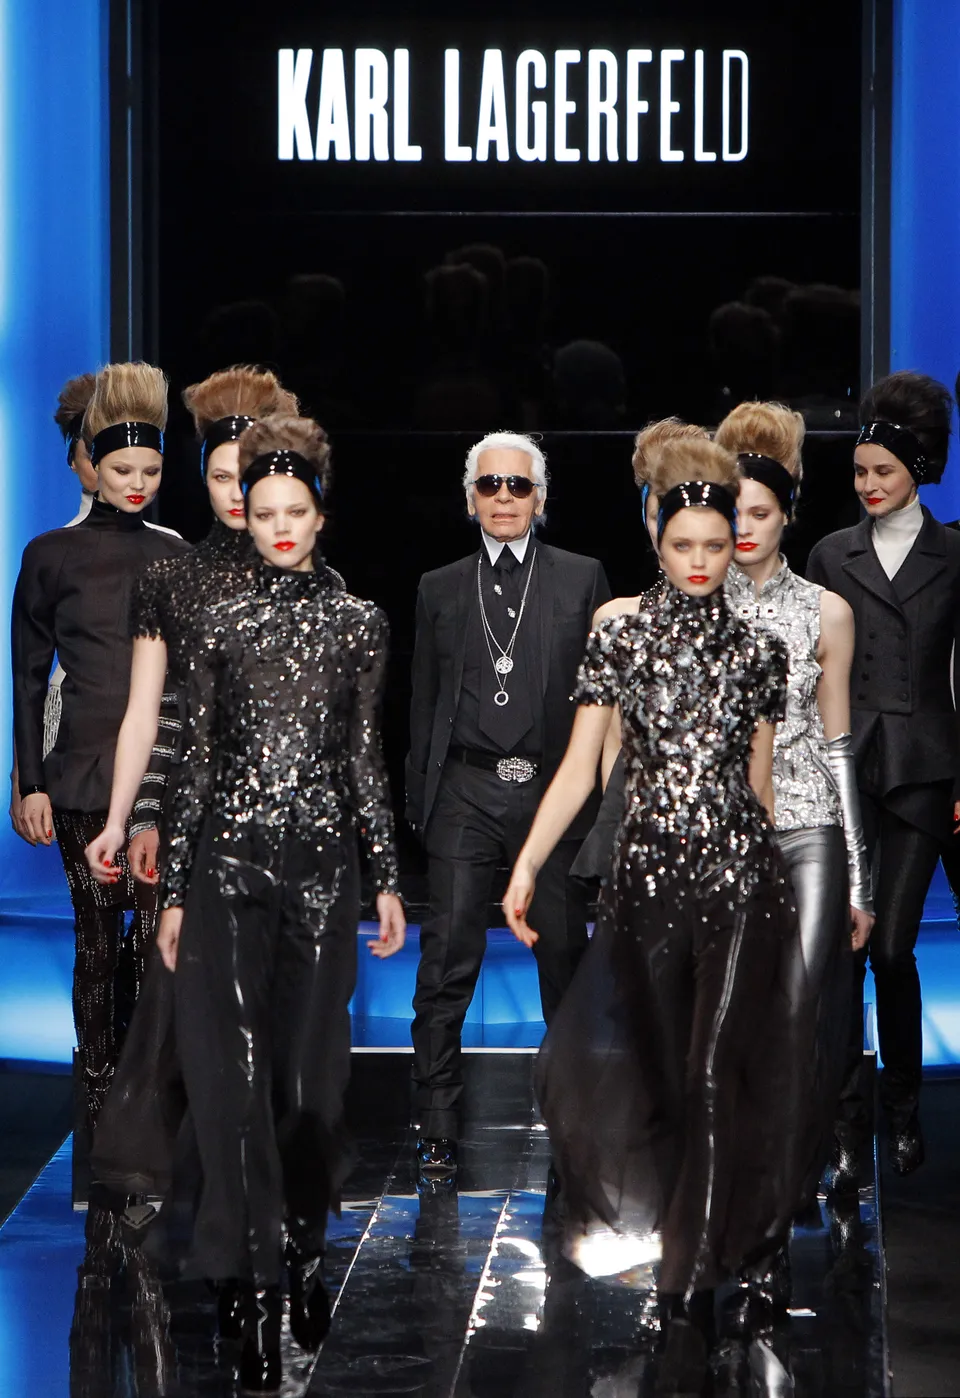 Karl Lagerfeld's 10 most iconic designs through the years